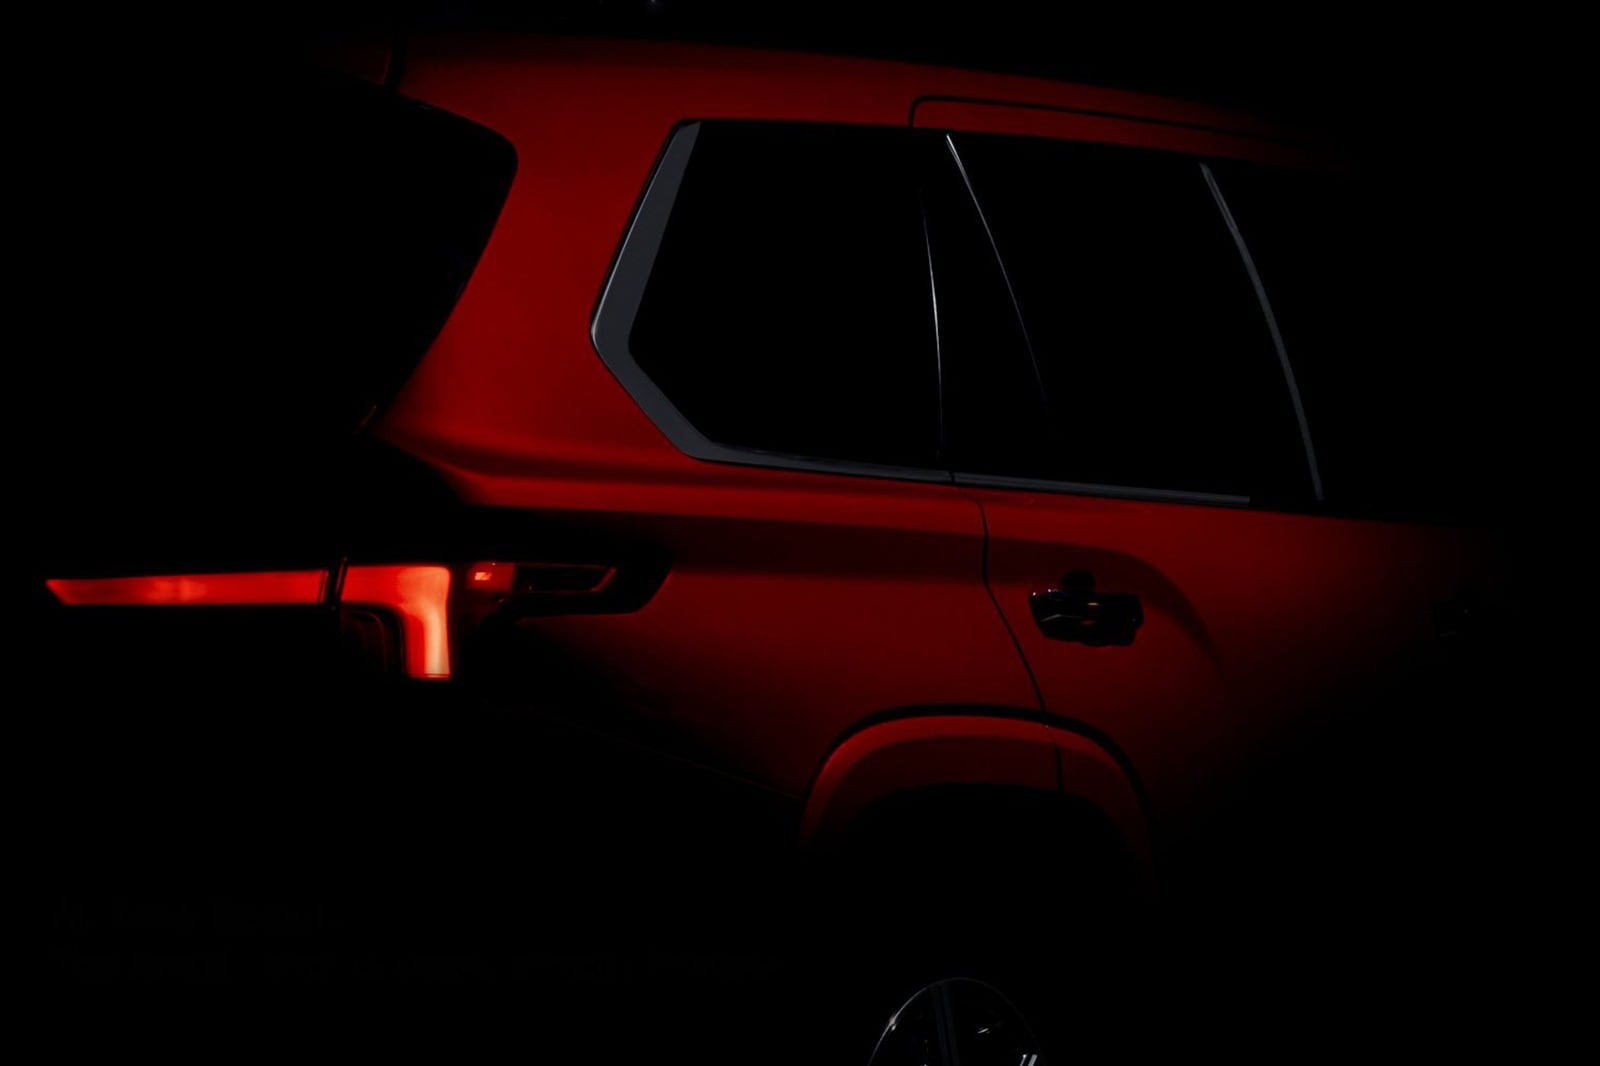 Toyota Teased the 2023 Sequoia. Here’s Everything We Know